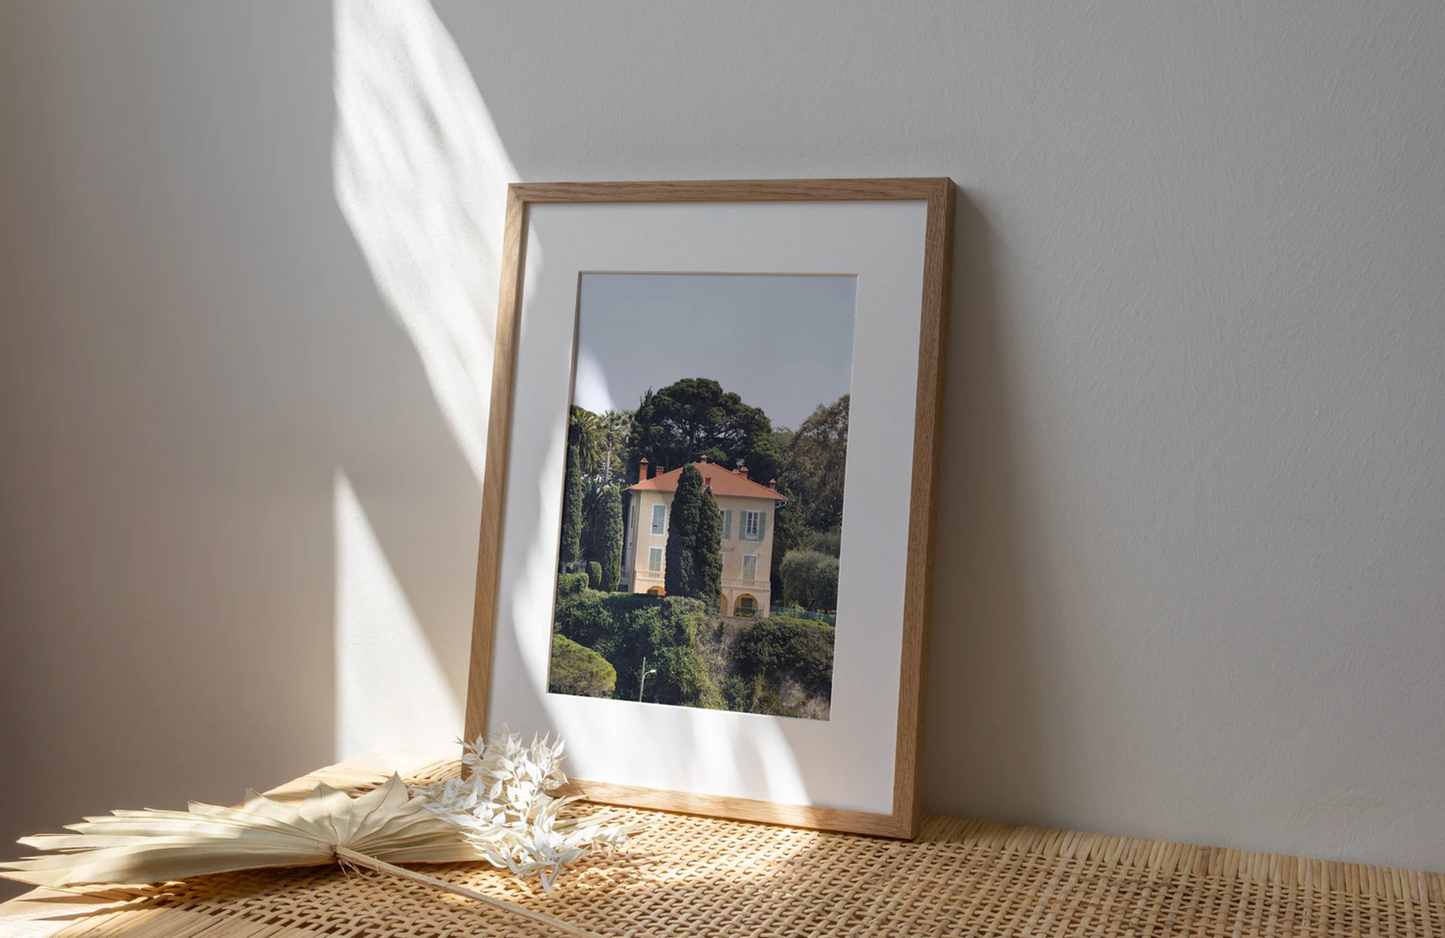 Villa in the French Riviera photography pictured leaning against the wall